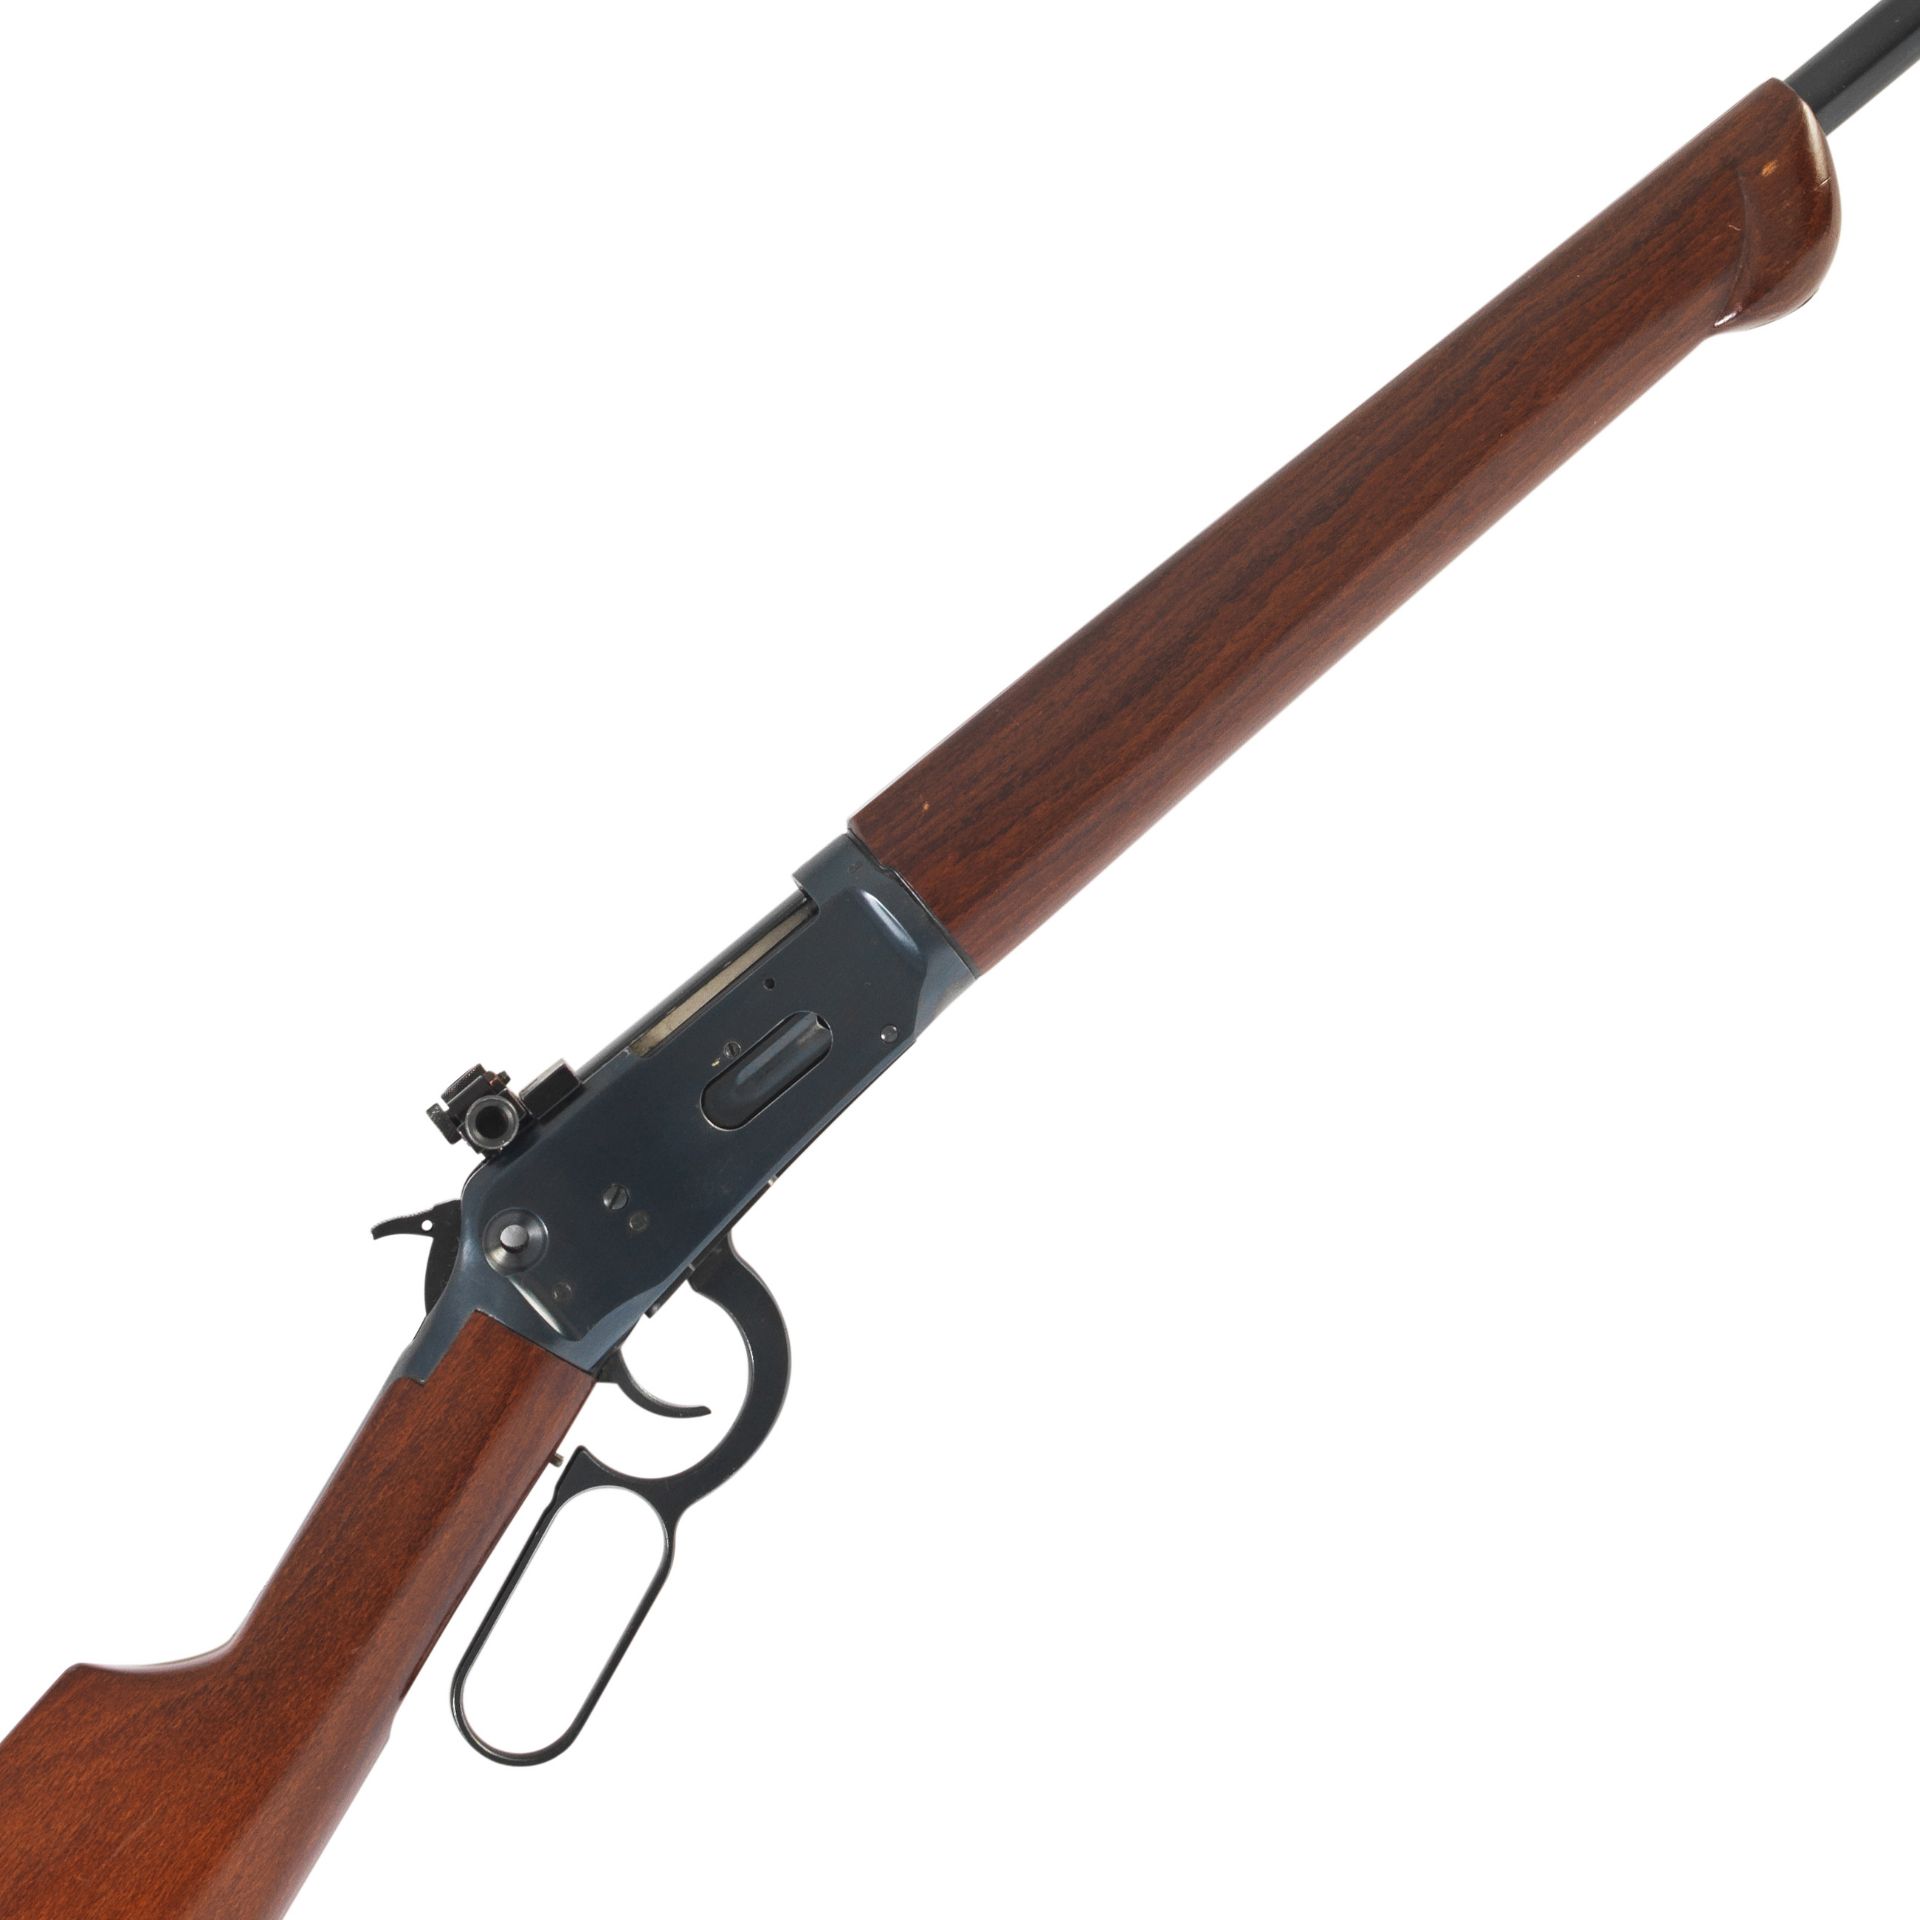 A .357 (Mag) 'Model 94' lever-action saddle-ring carbine, no. 6280015